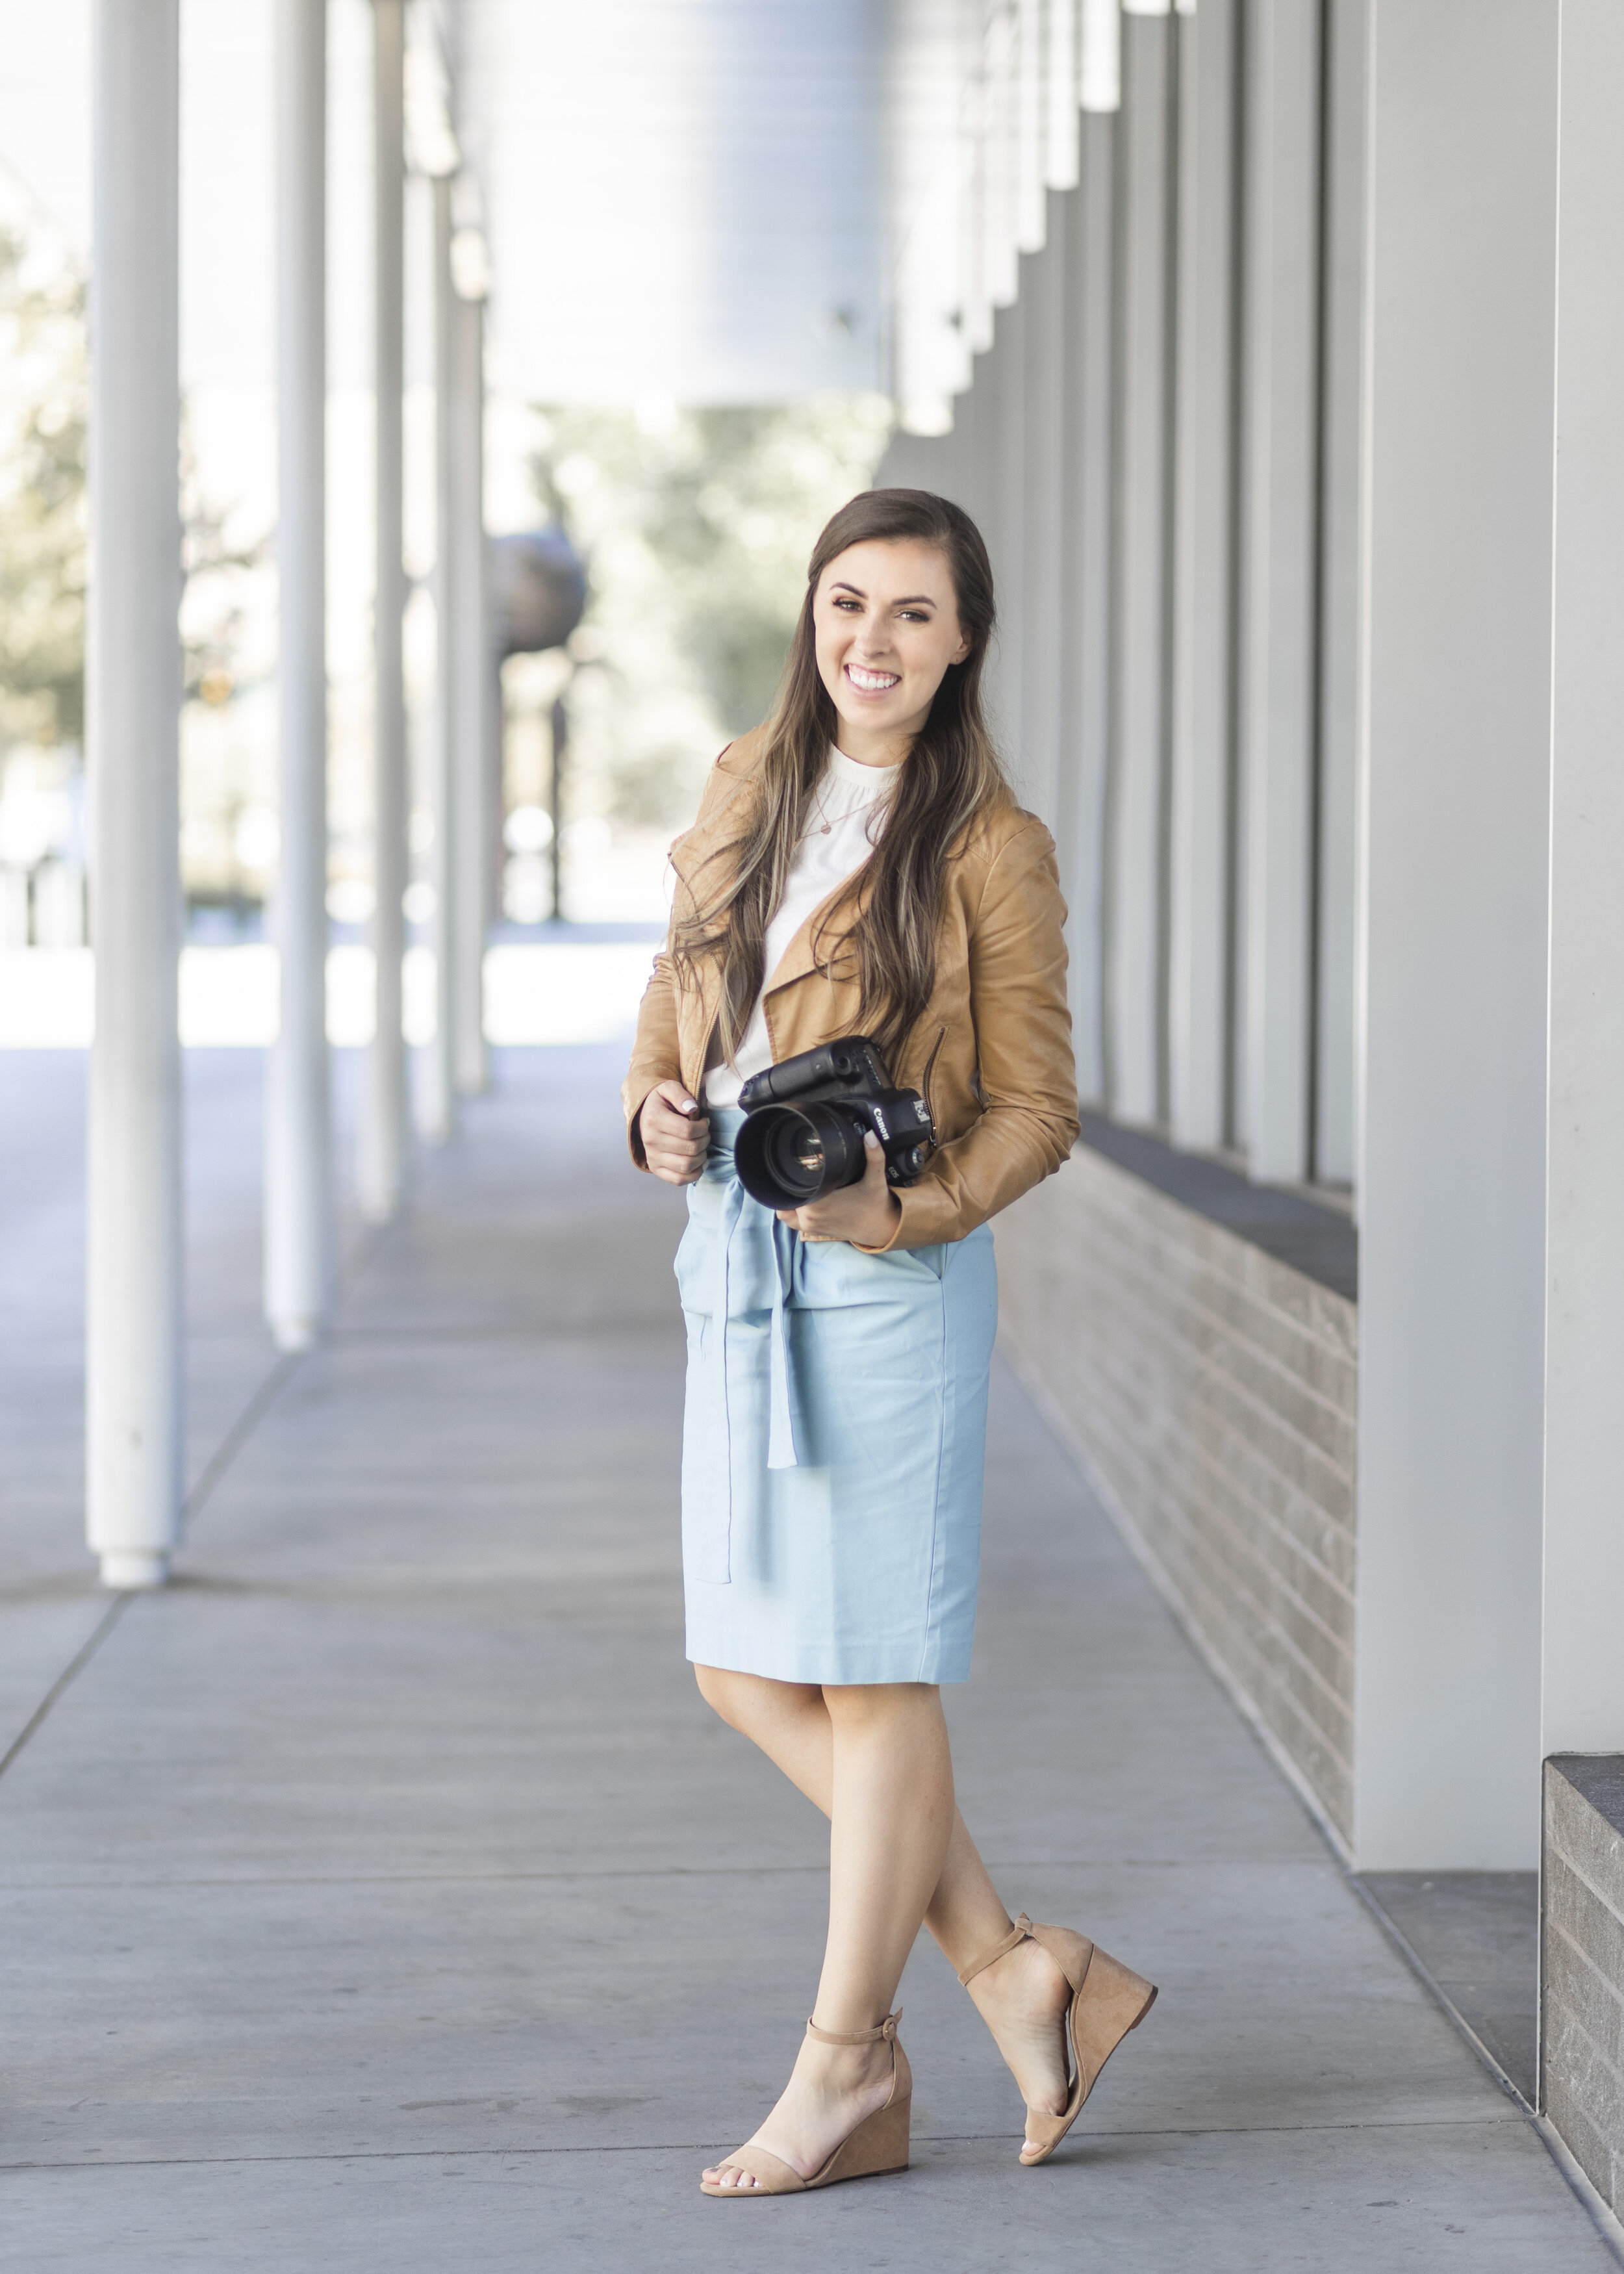  Posed in front of Provo, Utah’s Brigham Young University’s library, Savanna from Clarity Lane Photography flaunts her DSLR camera. utah valley professional photographer, brigham young university library, canon dslr camera, nude wedges, camel colored